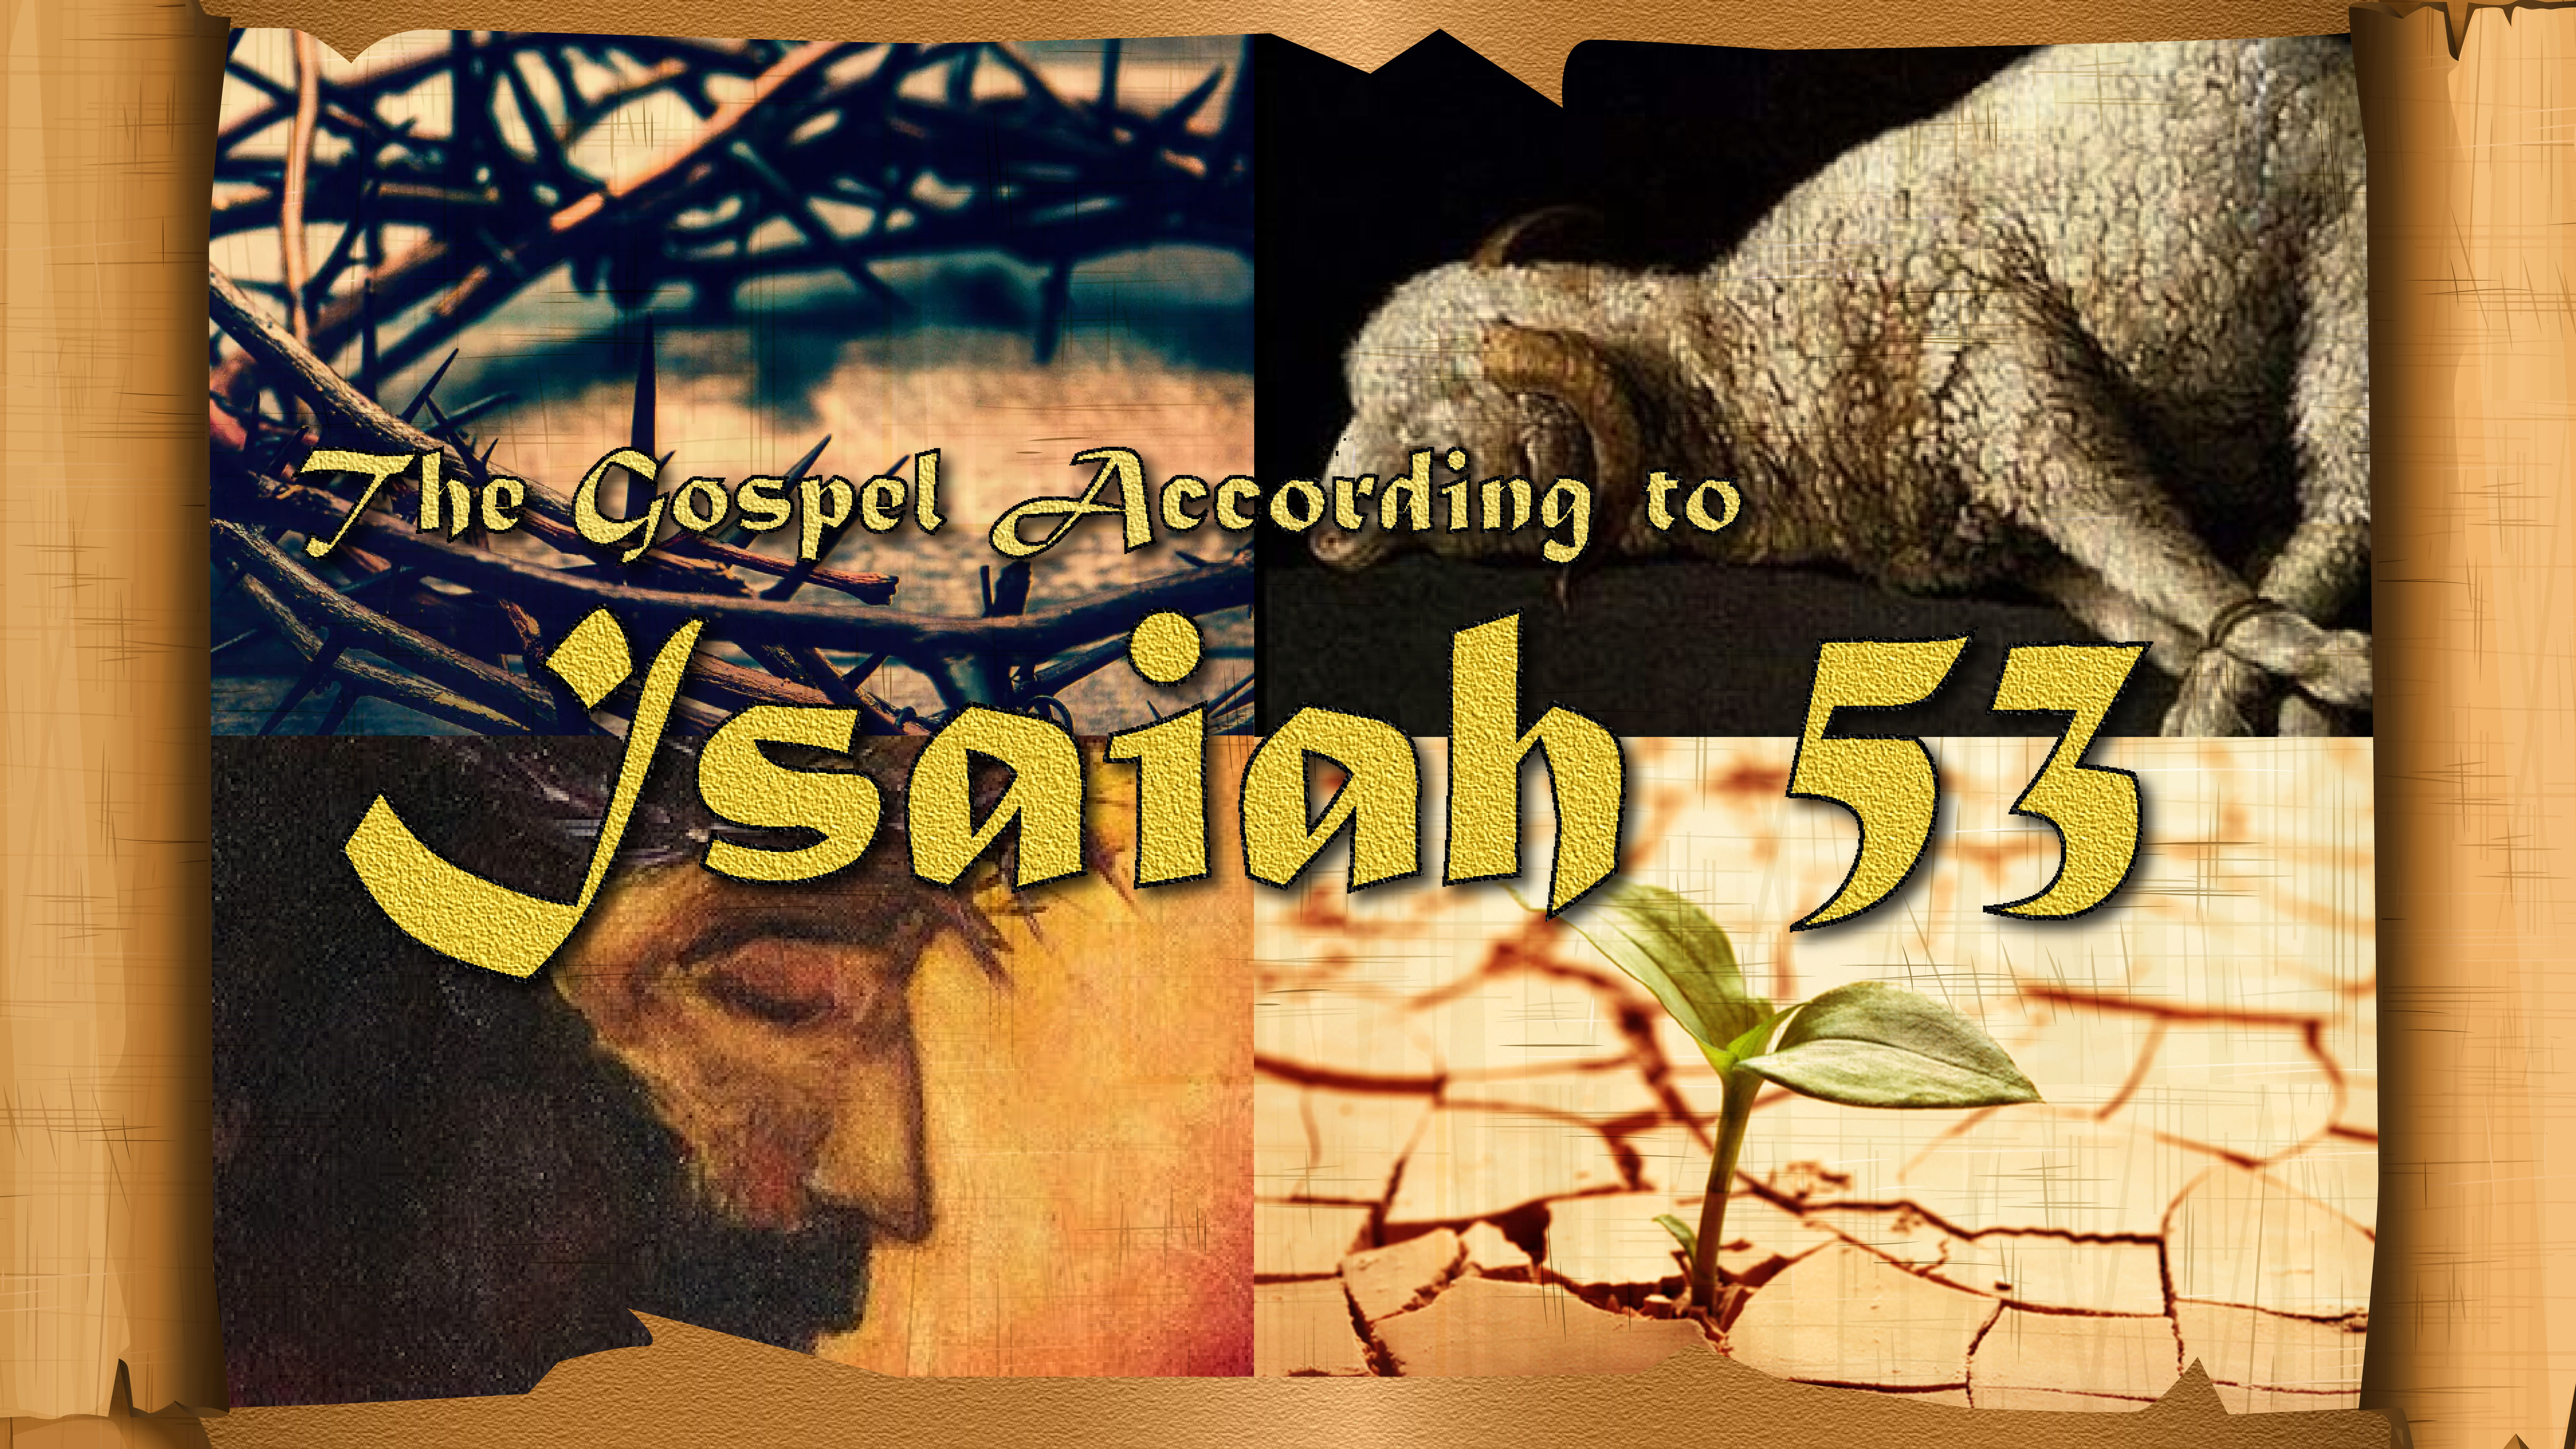 The Gospel According to Isaiah 53: Predictions about Jesus’s Life